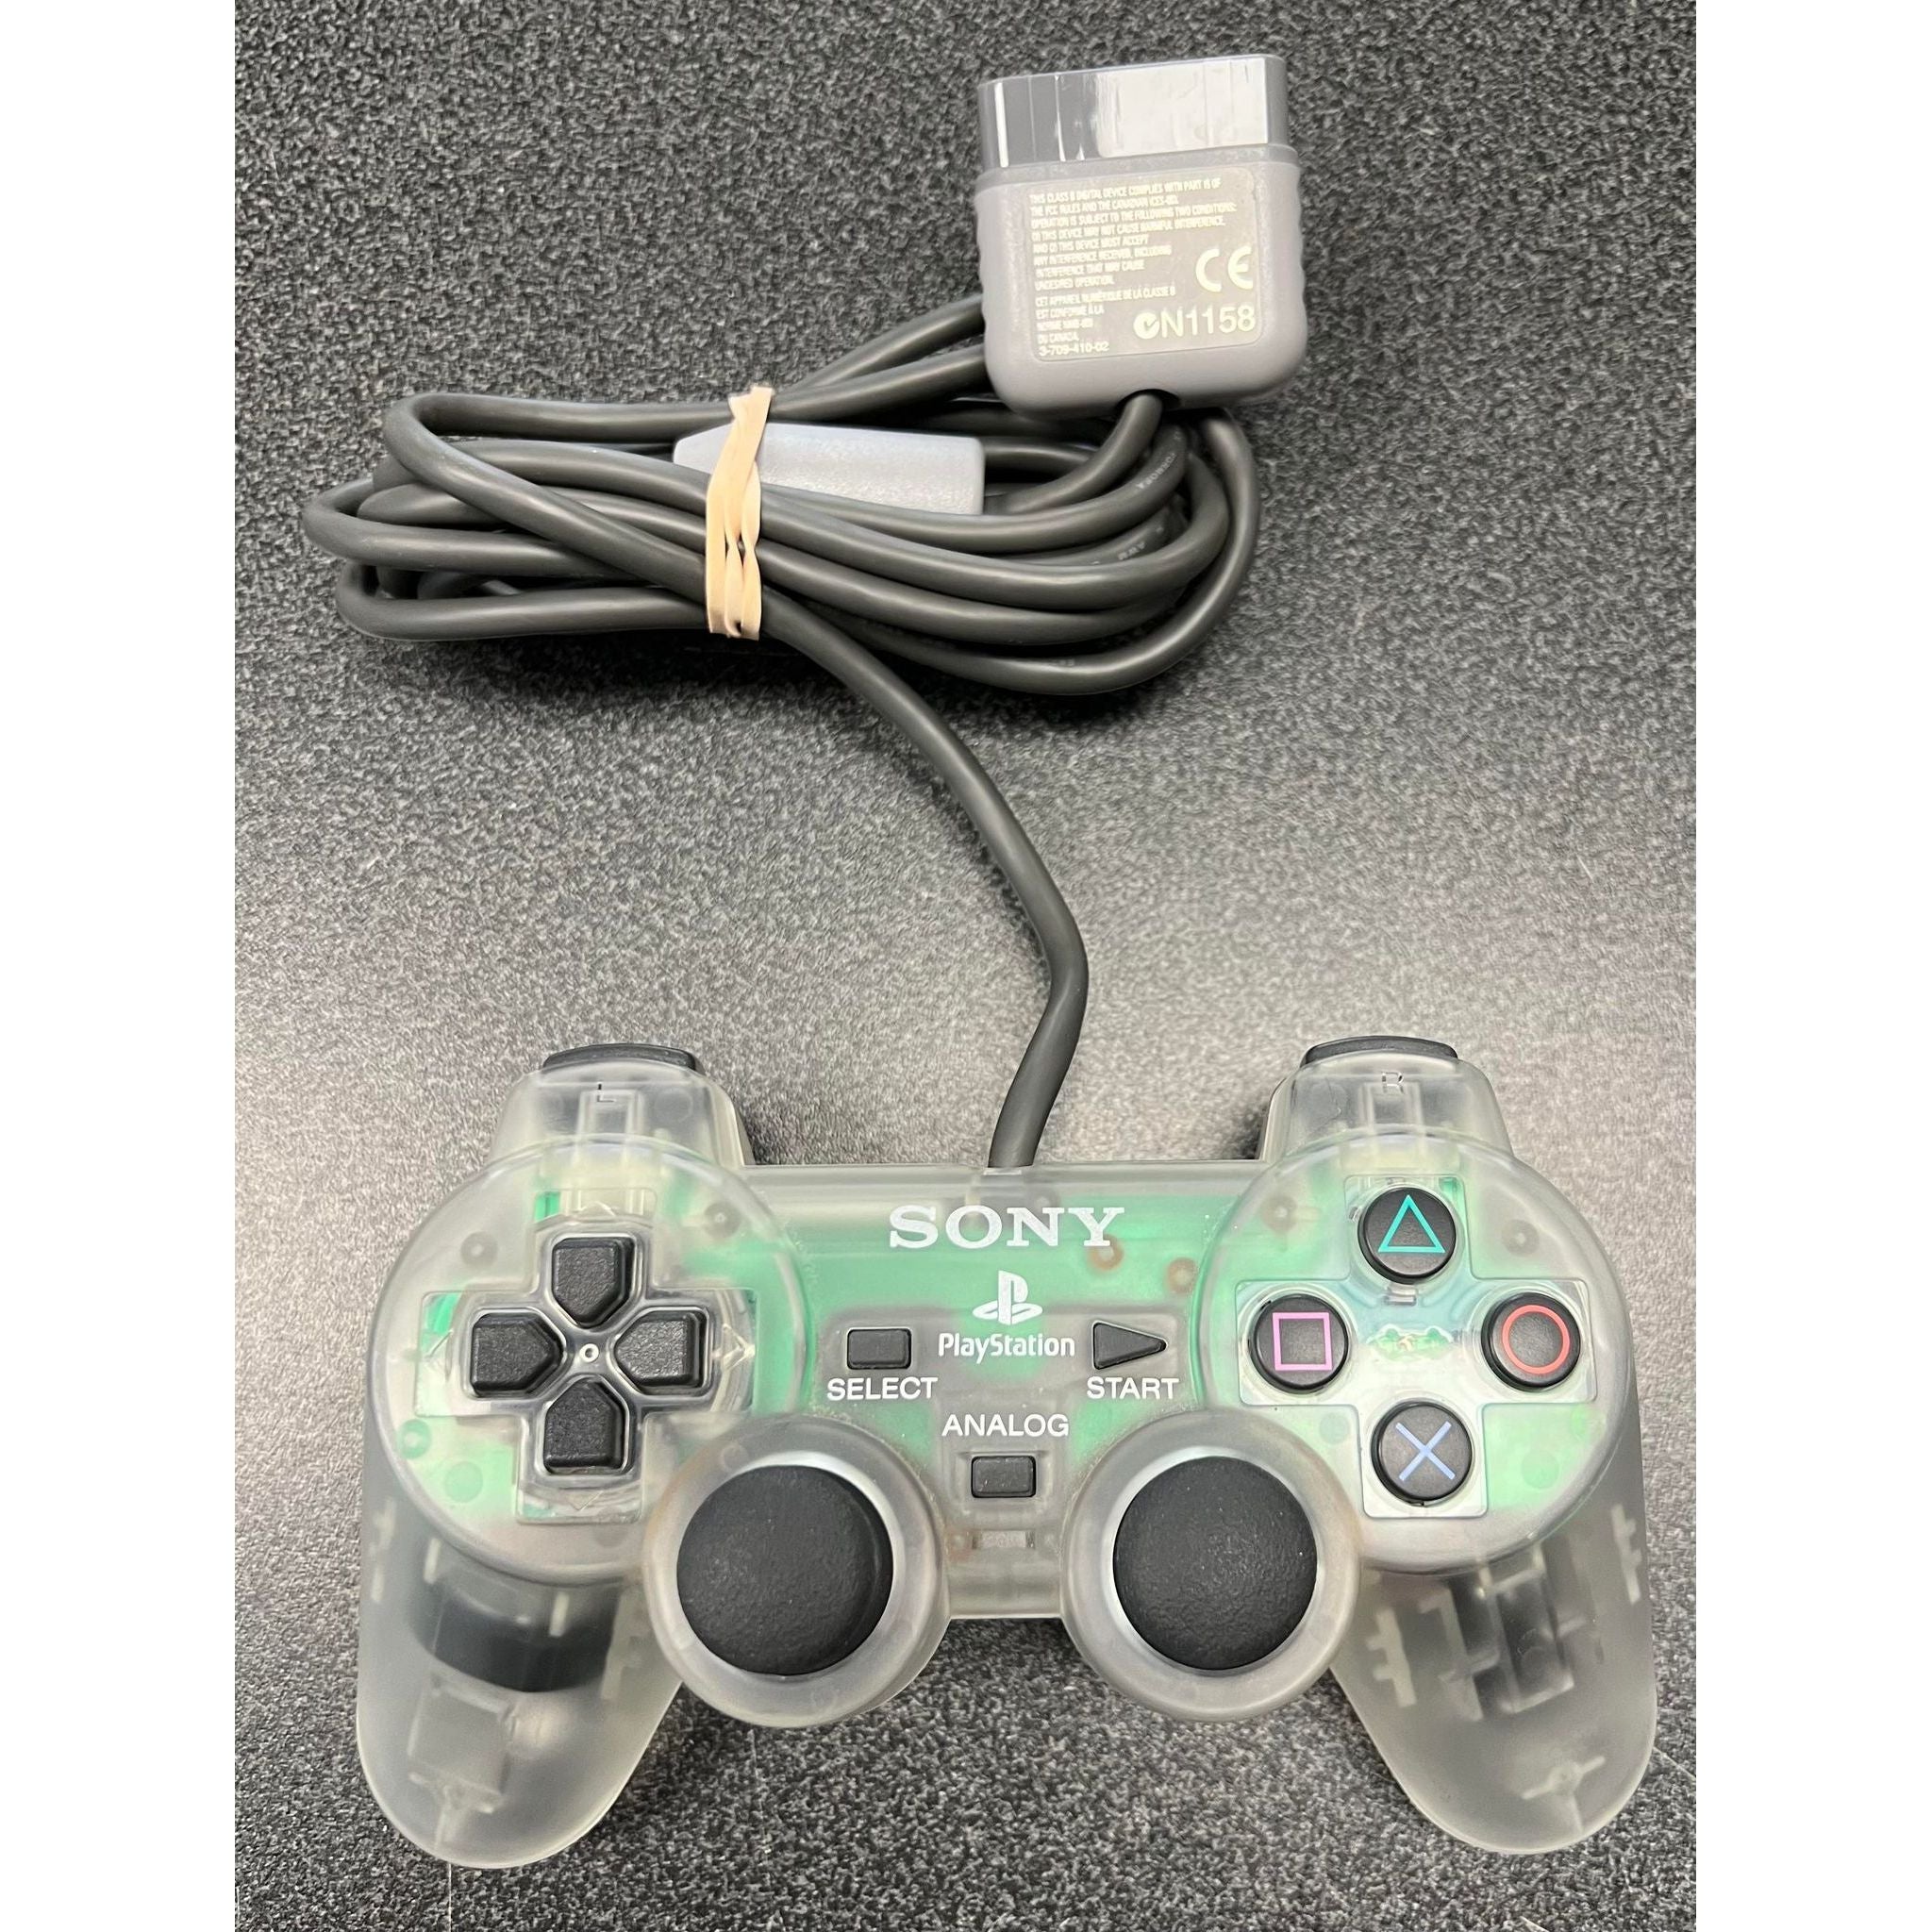 Sony Branded PlayStation 1 Dual Analog Controller (Clear)